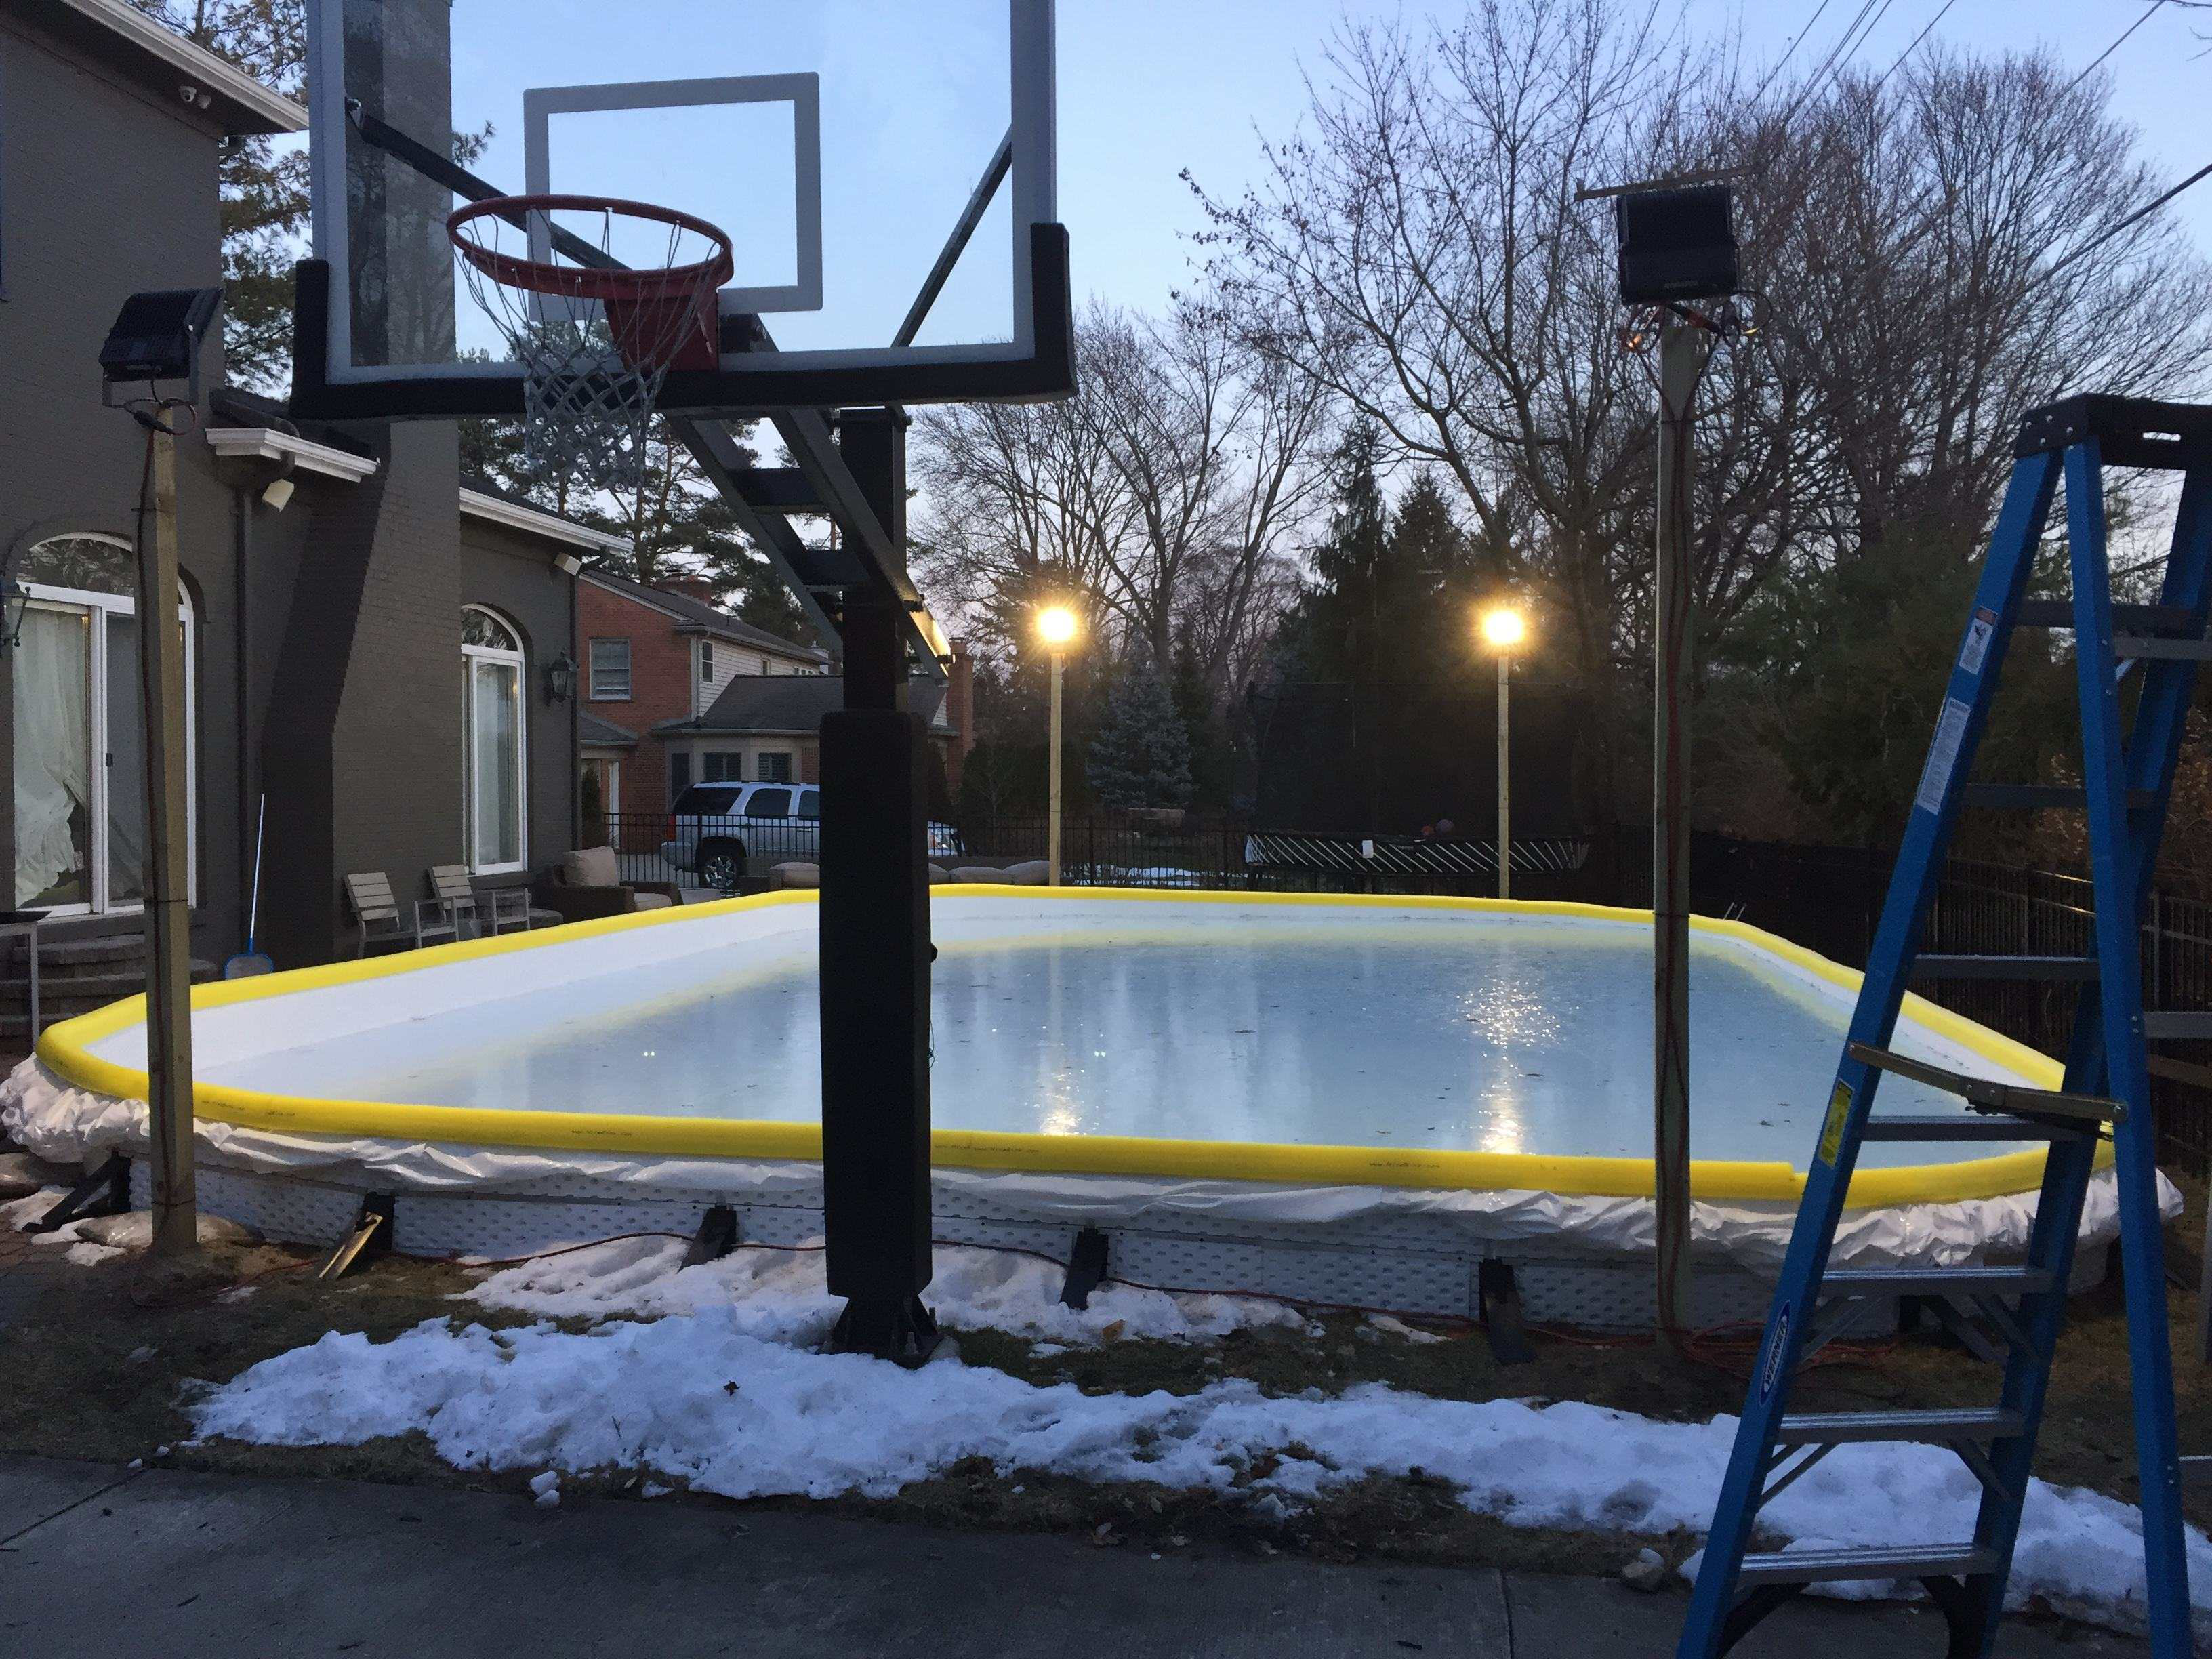 How to create a backyard ice skating rinks for customers